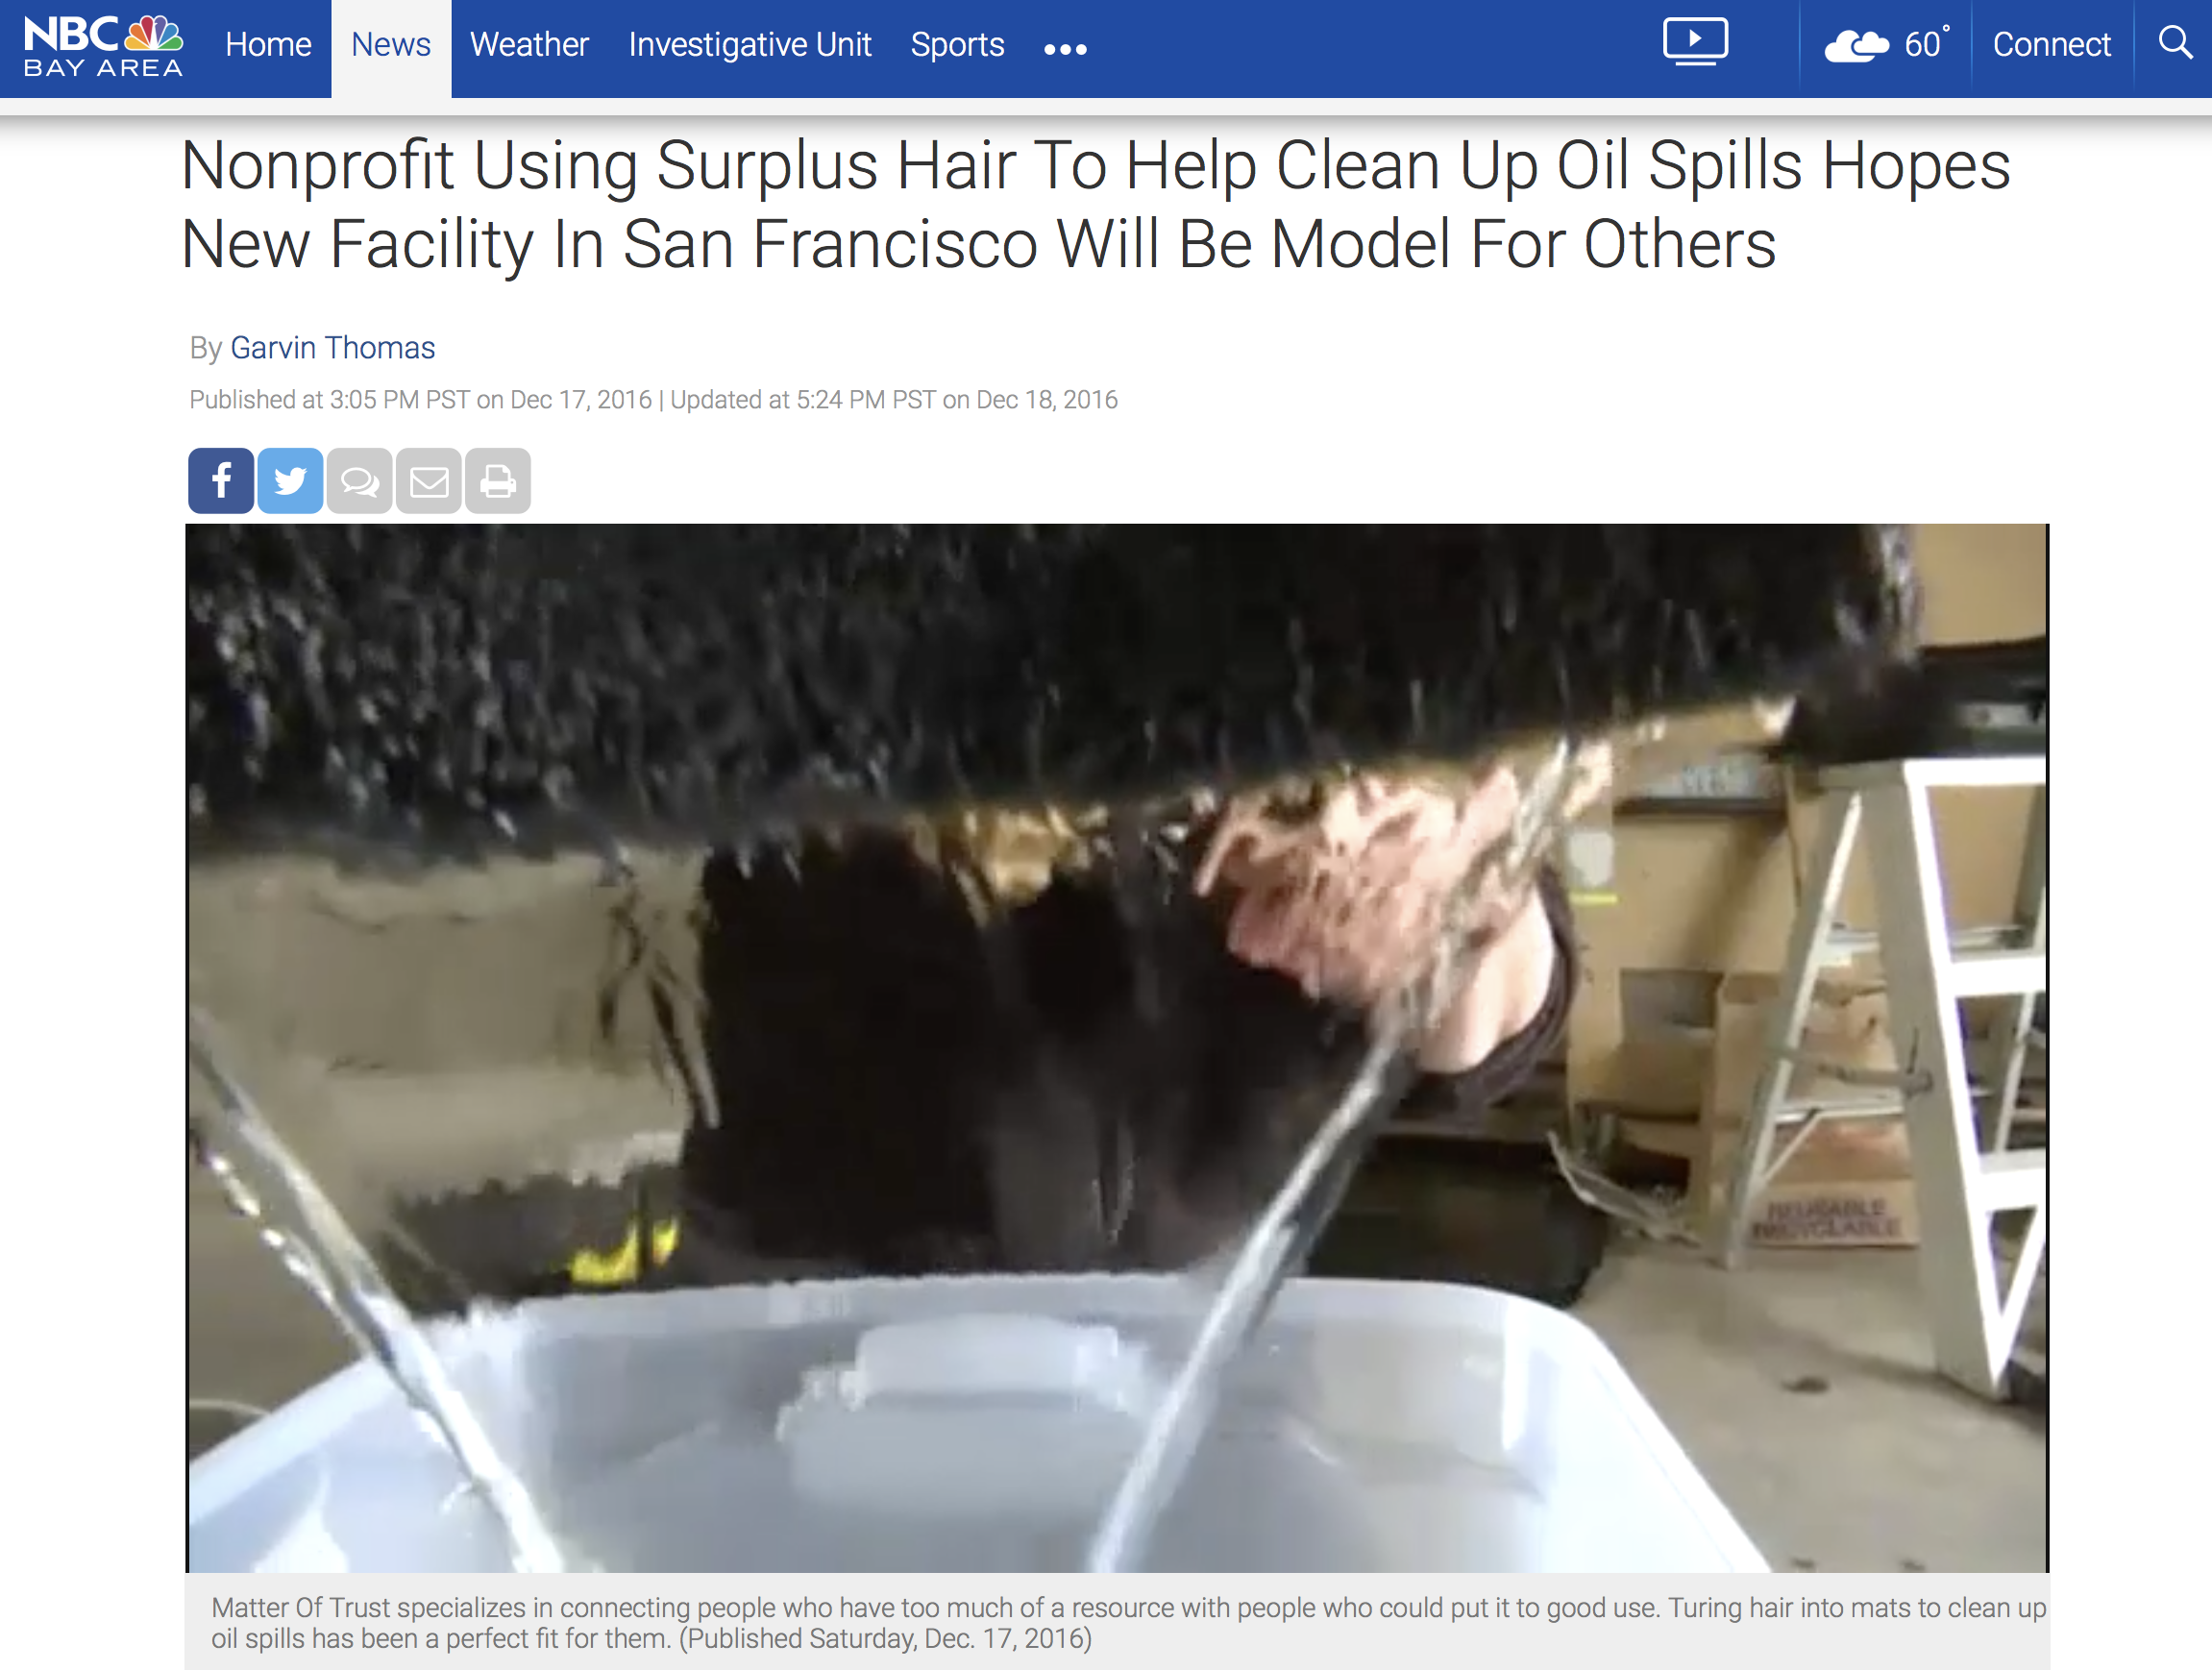 Nonprofit Using Surplus Hair To Help Clean Up Oil Spills Hopes New Facility In San Francisco Will Be Model For Others